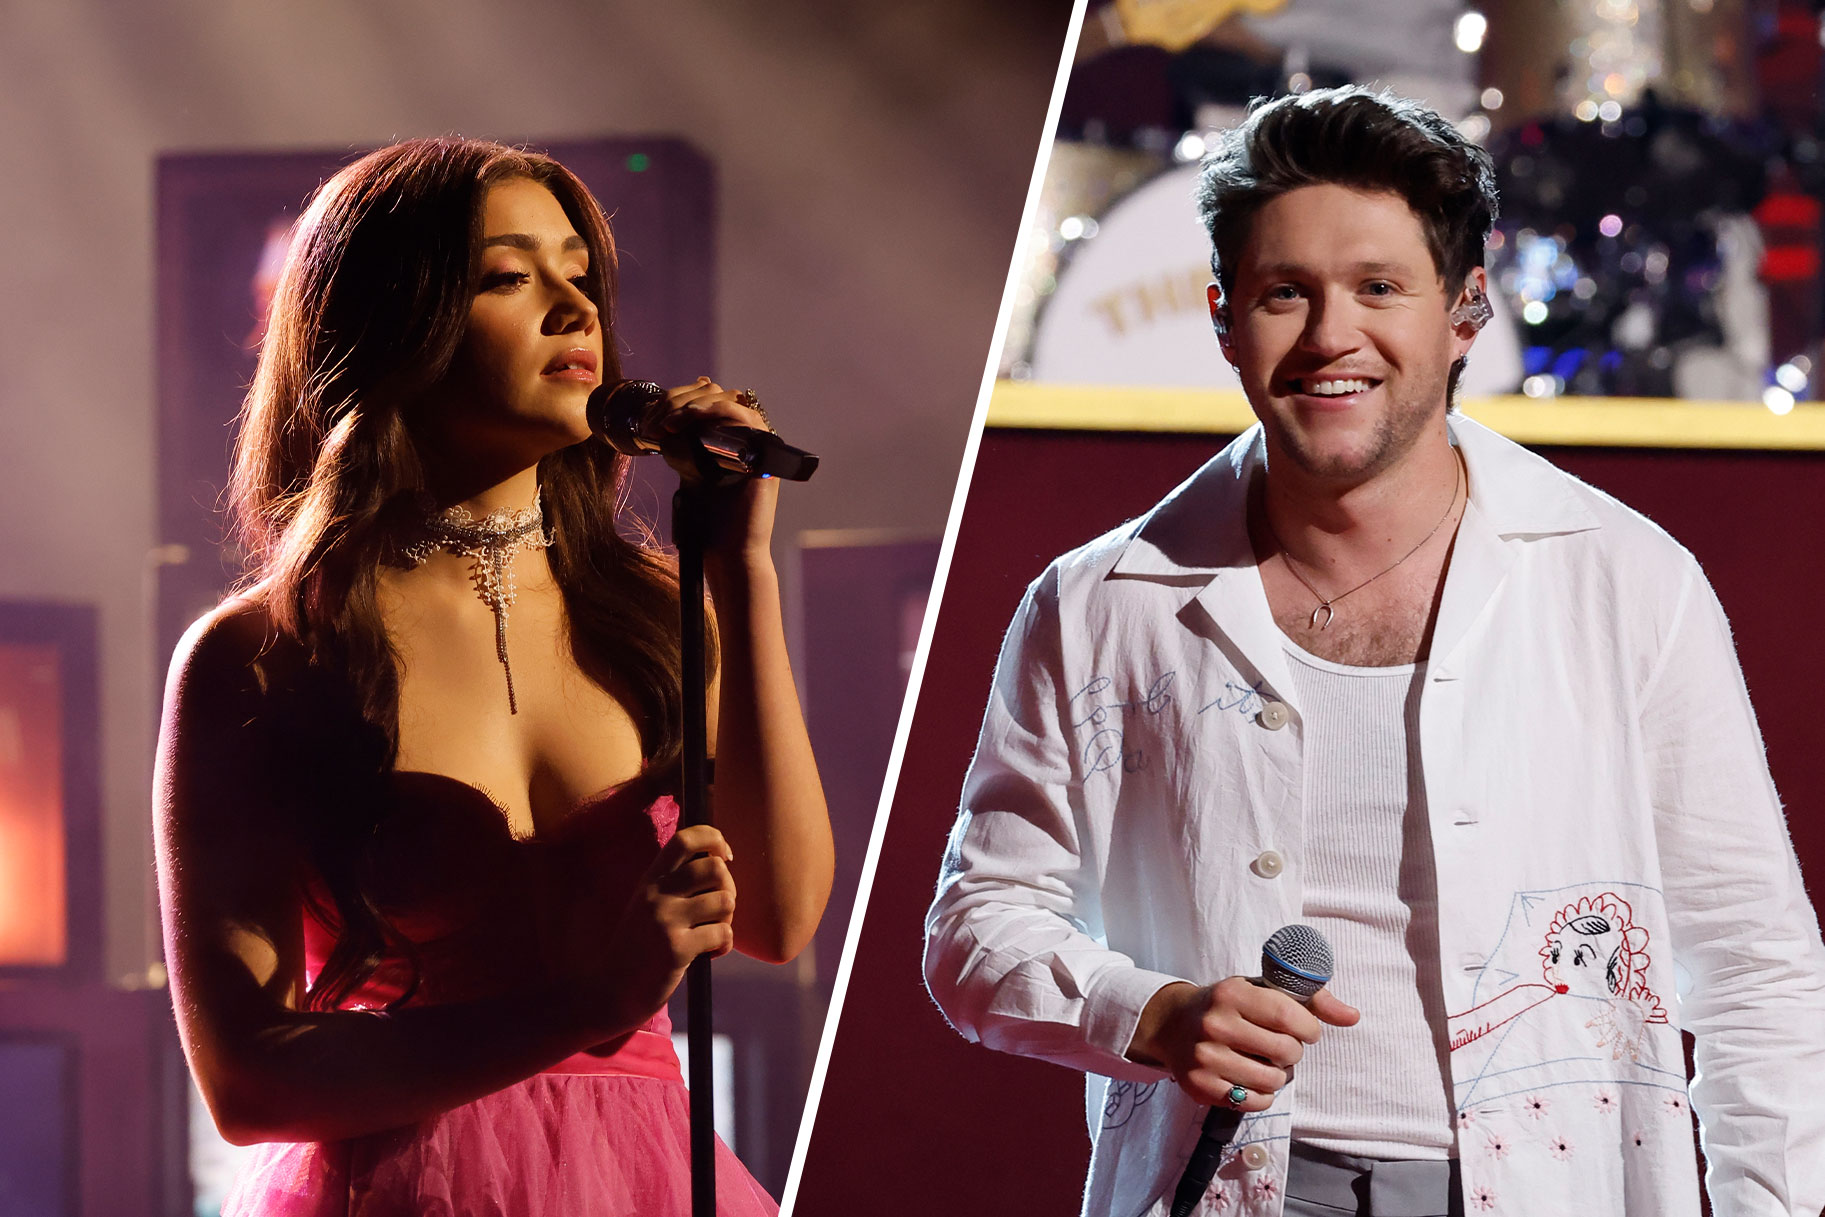 Gina Miles accompanies Niall Horan on tour: dates and venues